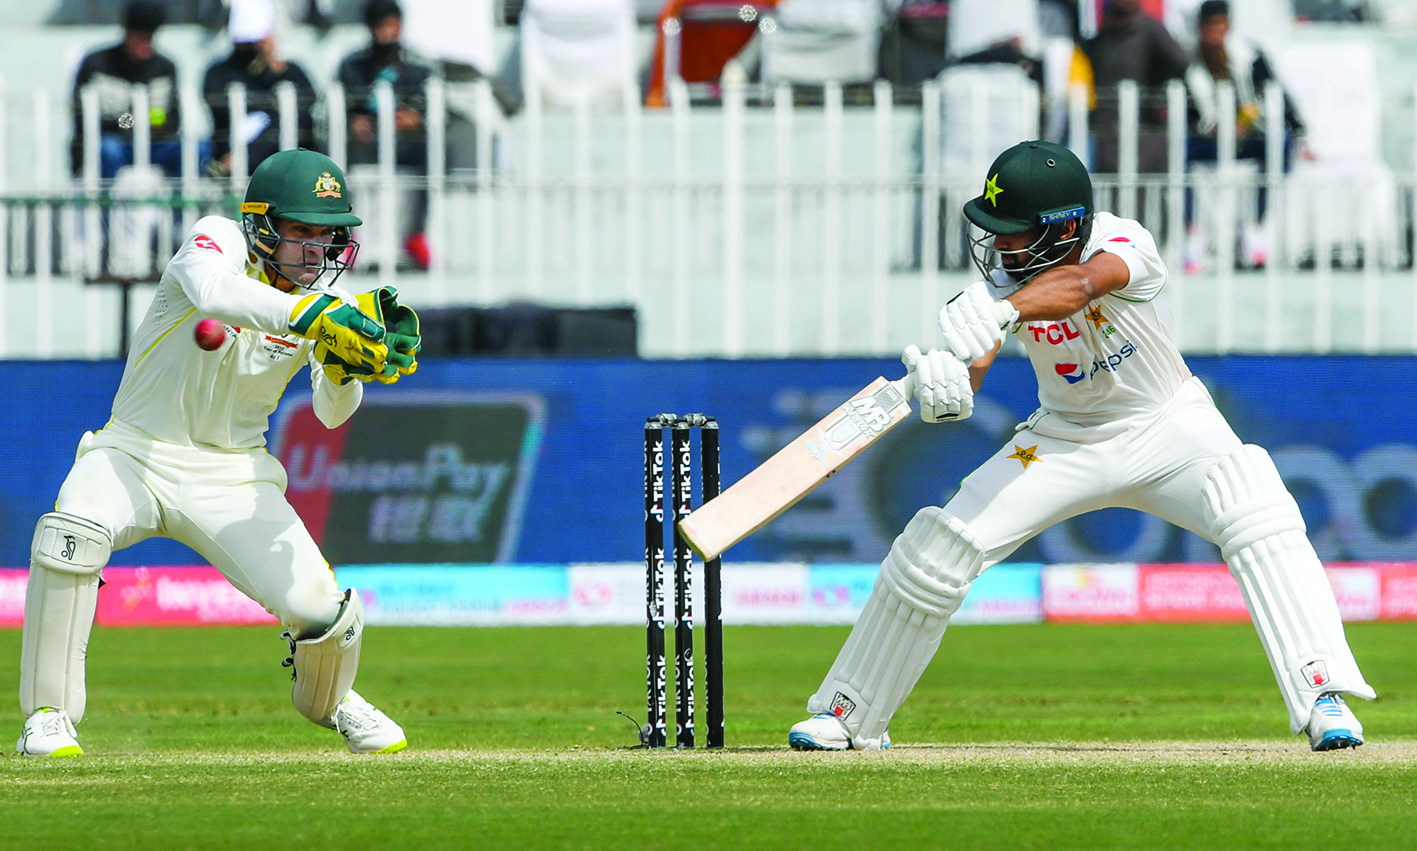 RAWALPINDI: Pakistan's Abdullah Shafique (right) plays a shot during the fifth day of the first Test cricket match between Pakistan and Australia at the Rawalpindi Cricket Stadium yesterday.- AFPn